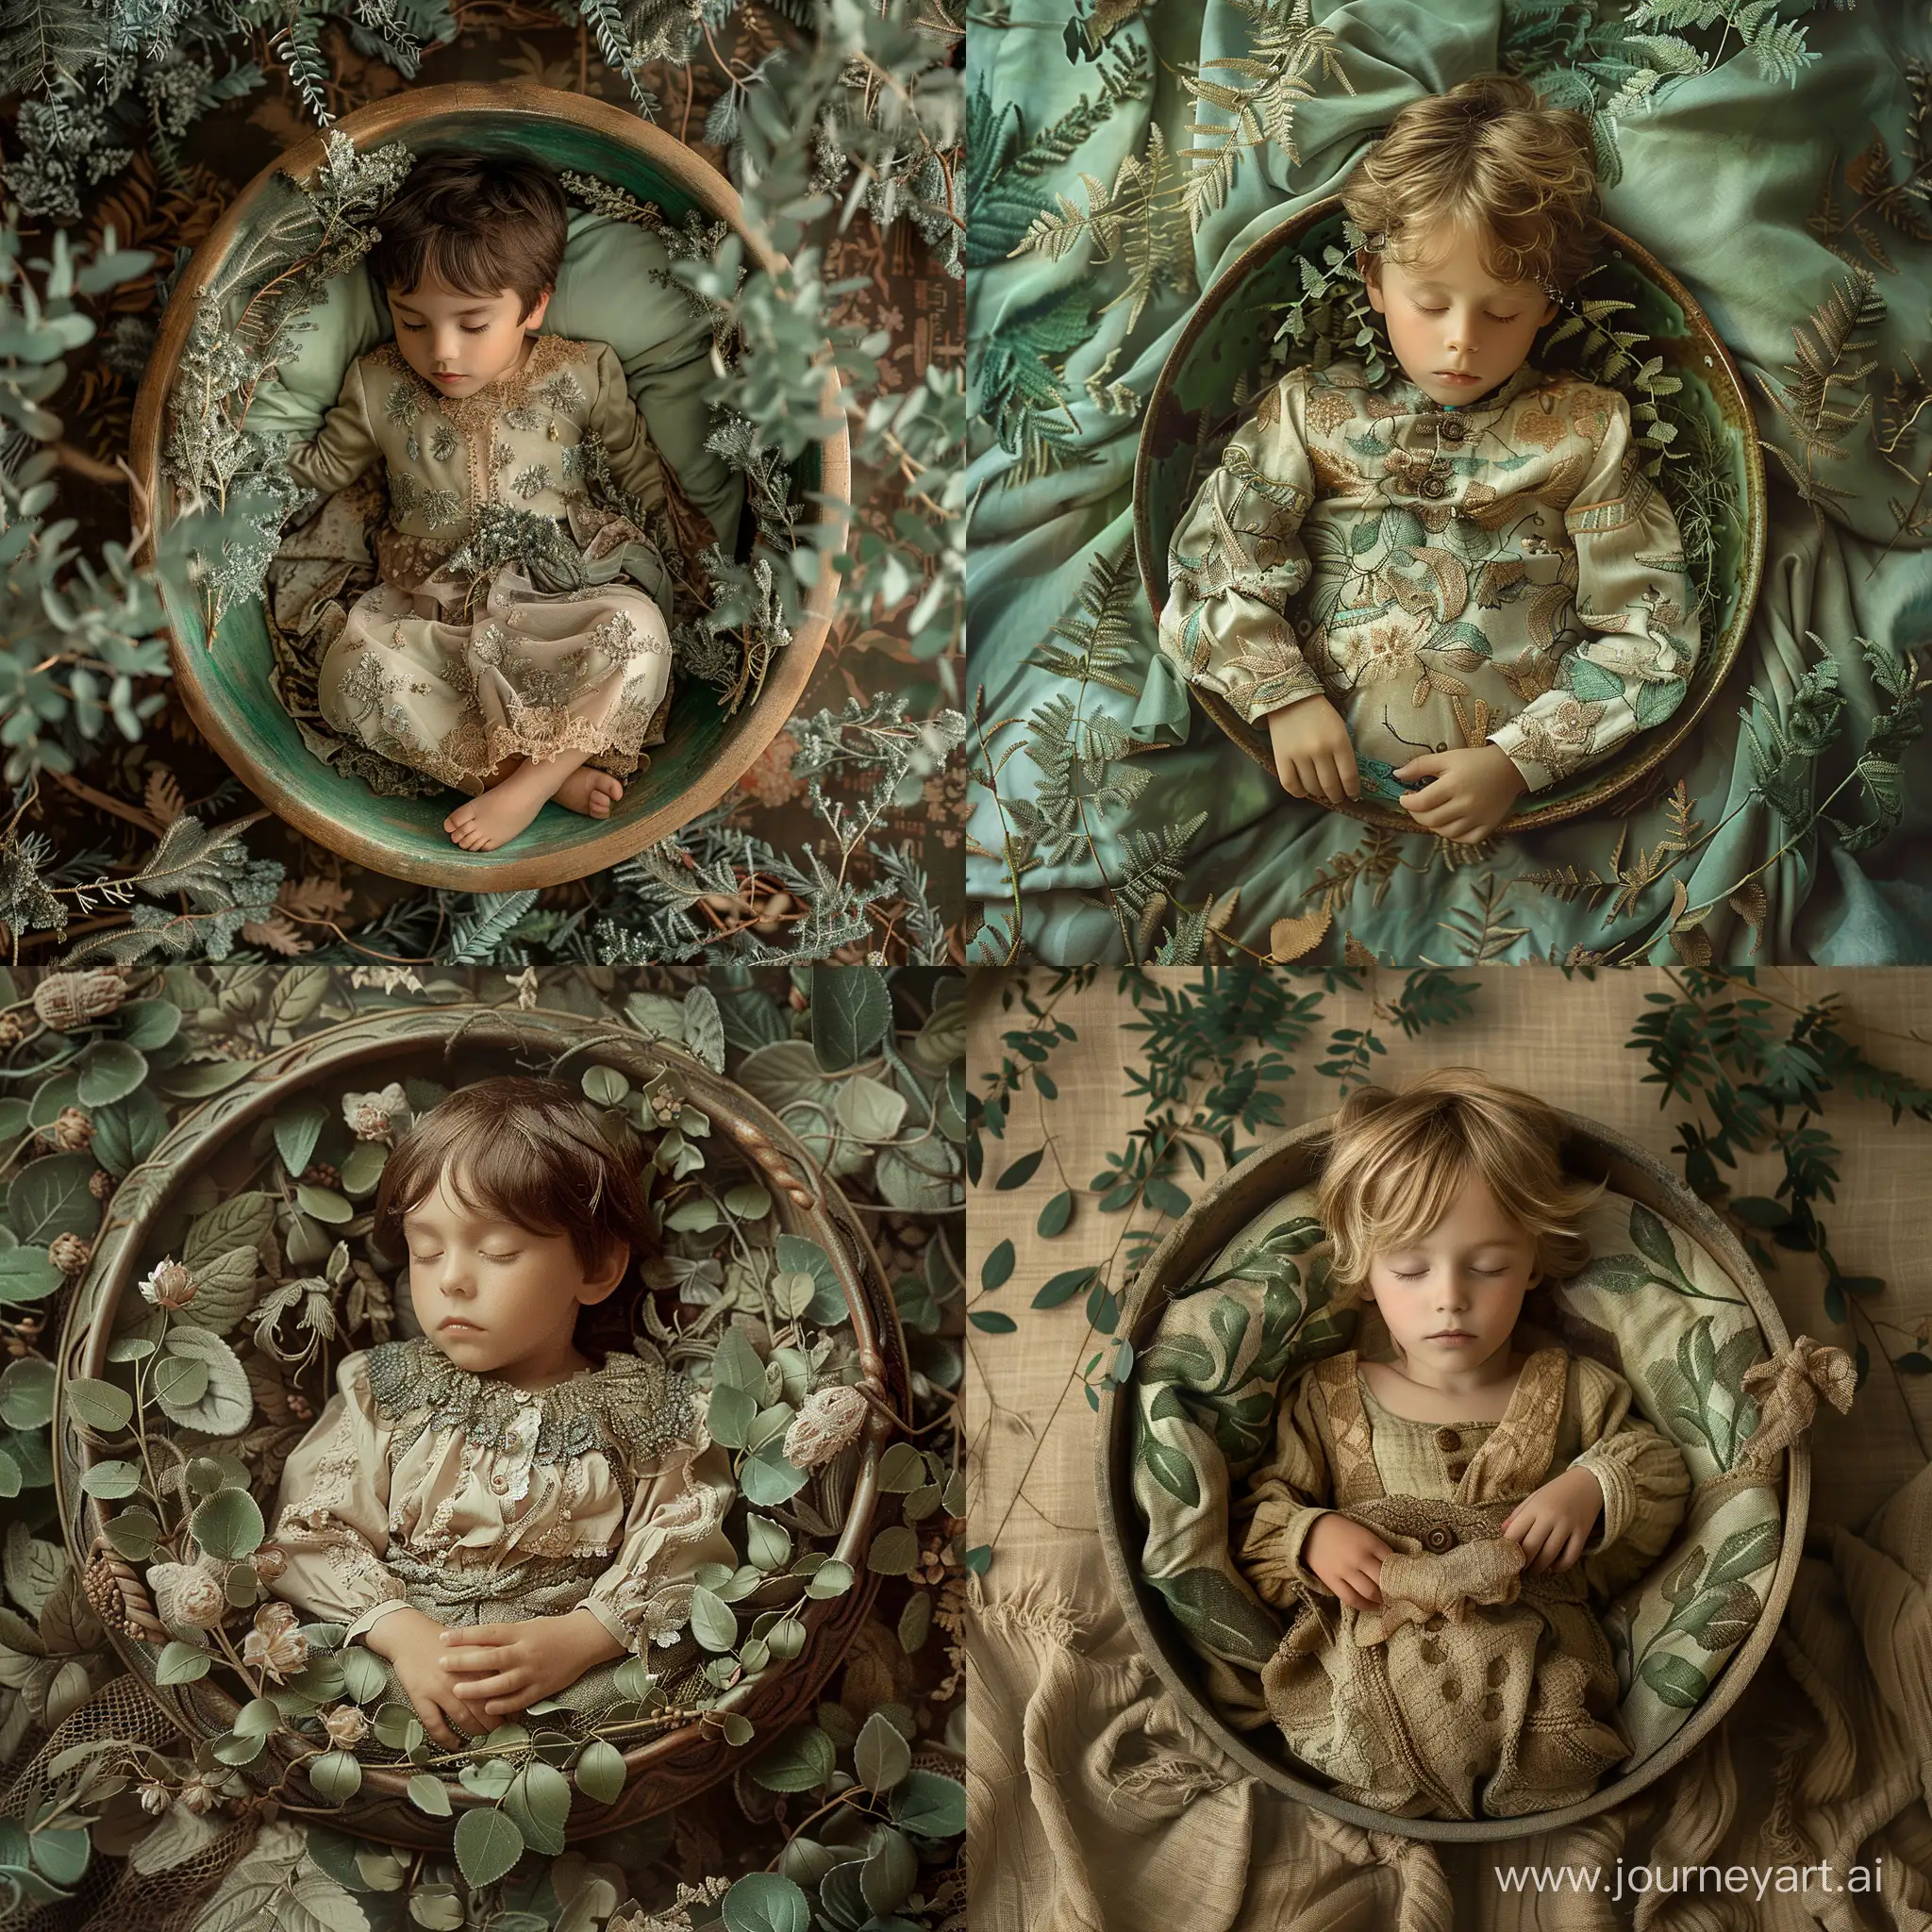 Tranquil-Slumber-Rustic-Textures-and-Detailed-Foliage-Surround-Sleeping-Boy-in-Bowl